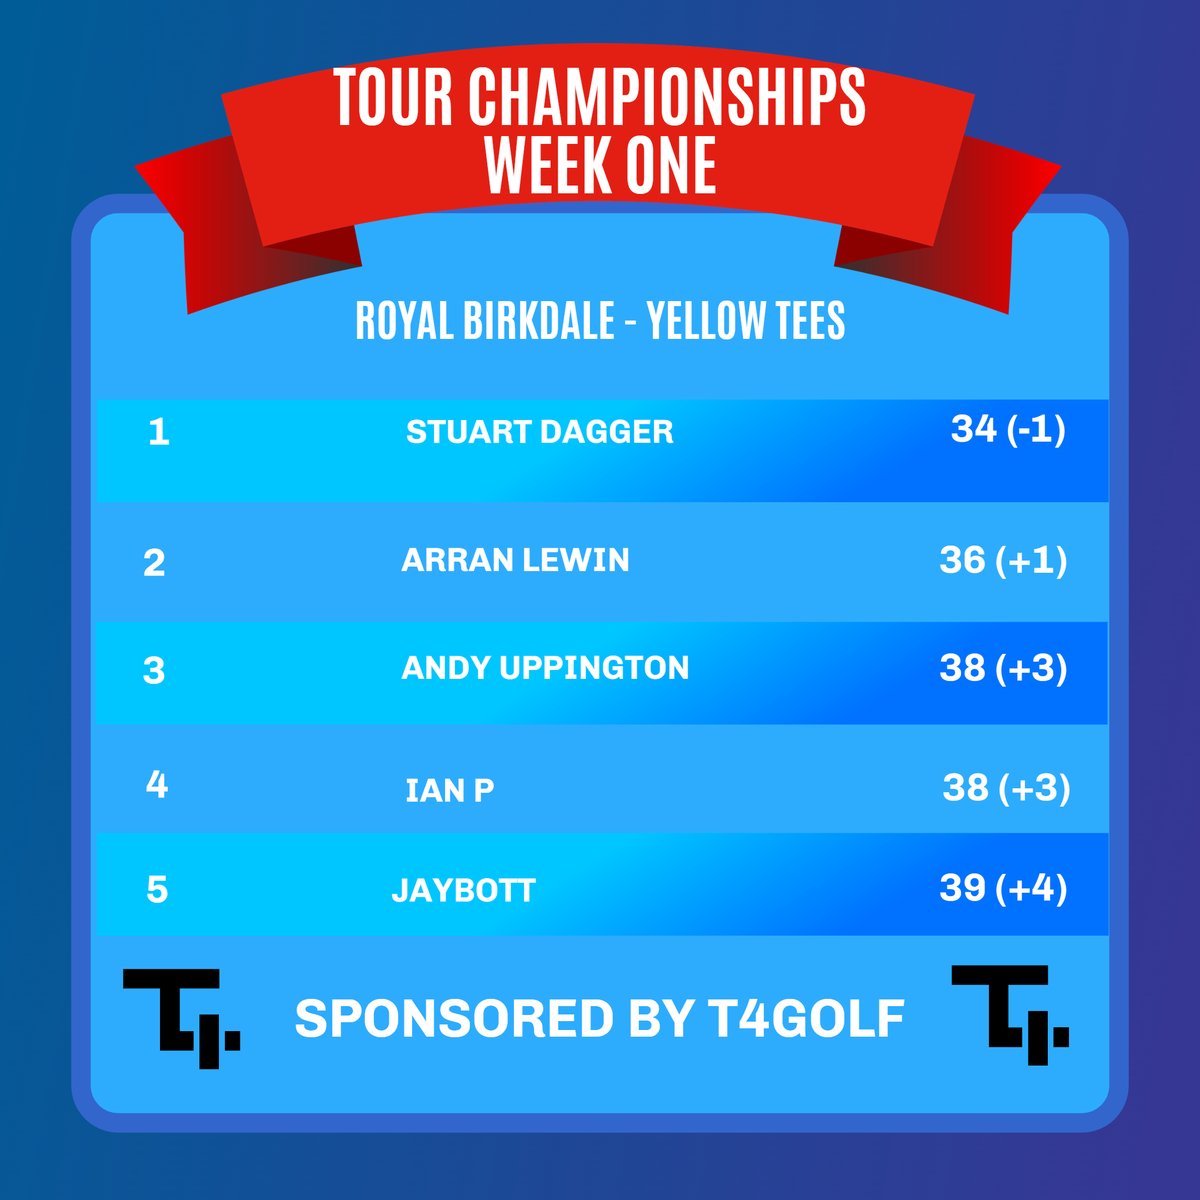 Tee Time Tour Championship week 1 leaderboard Stuart Dagger improves his score to -2 at the top of leaderboard & Ian P joins the top 5. remember this is FREE TO PLAY just join in the shop for your chance to win our biggest giveaway yet. Sponsored by T4 Golf